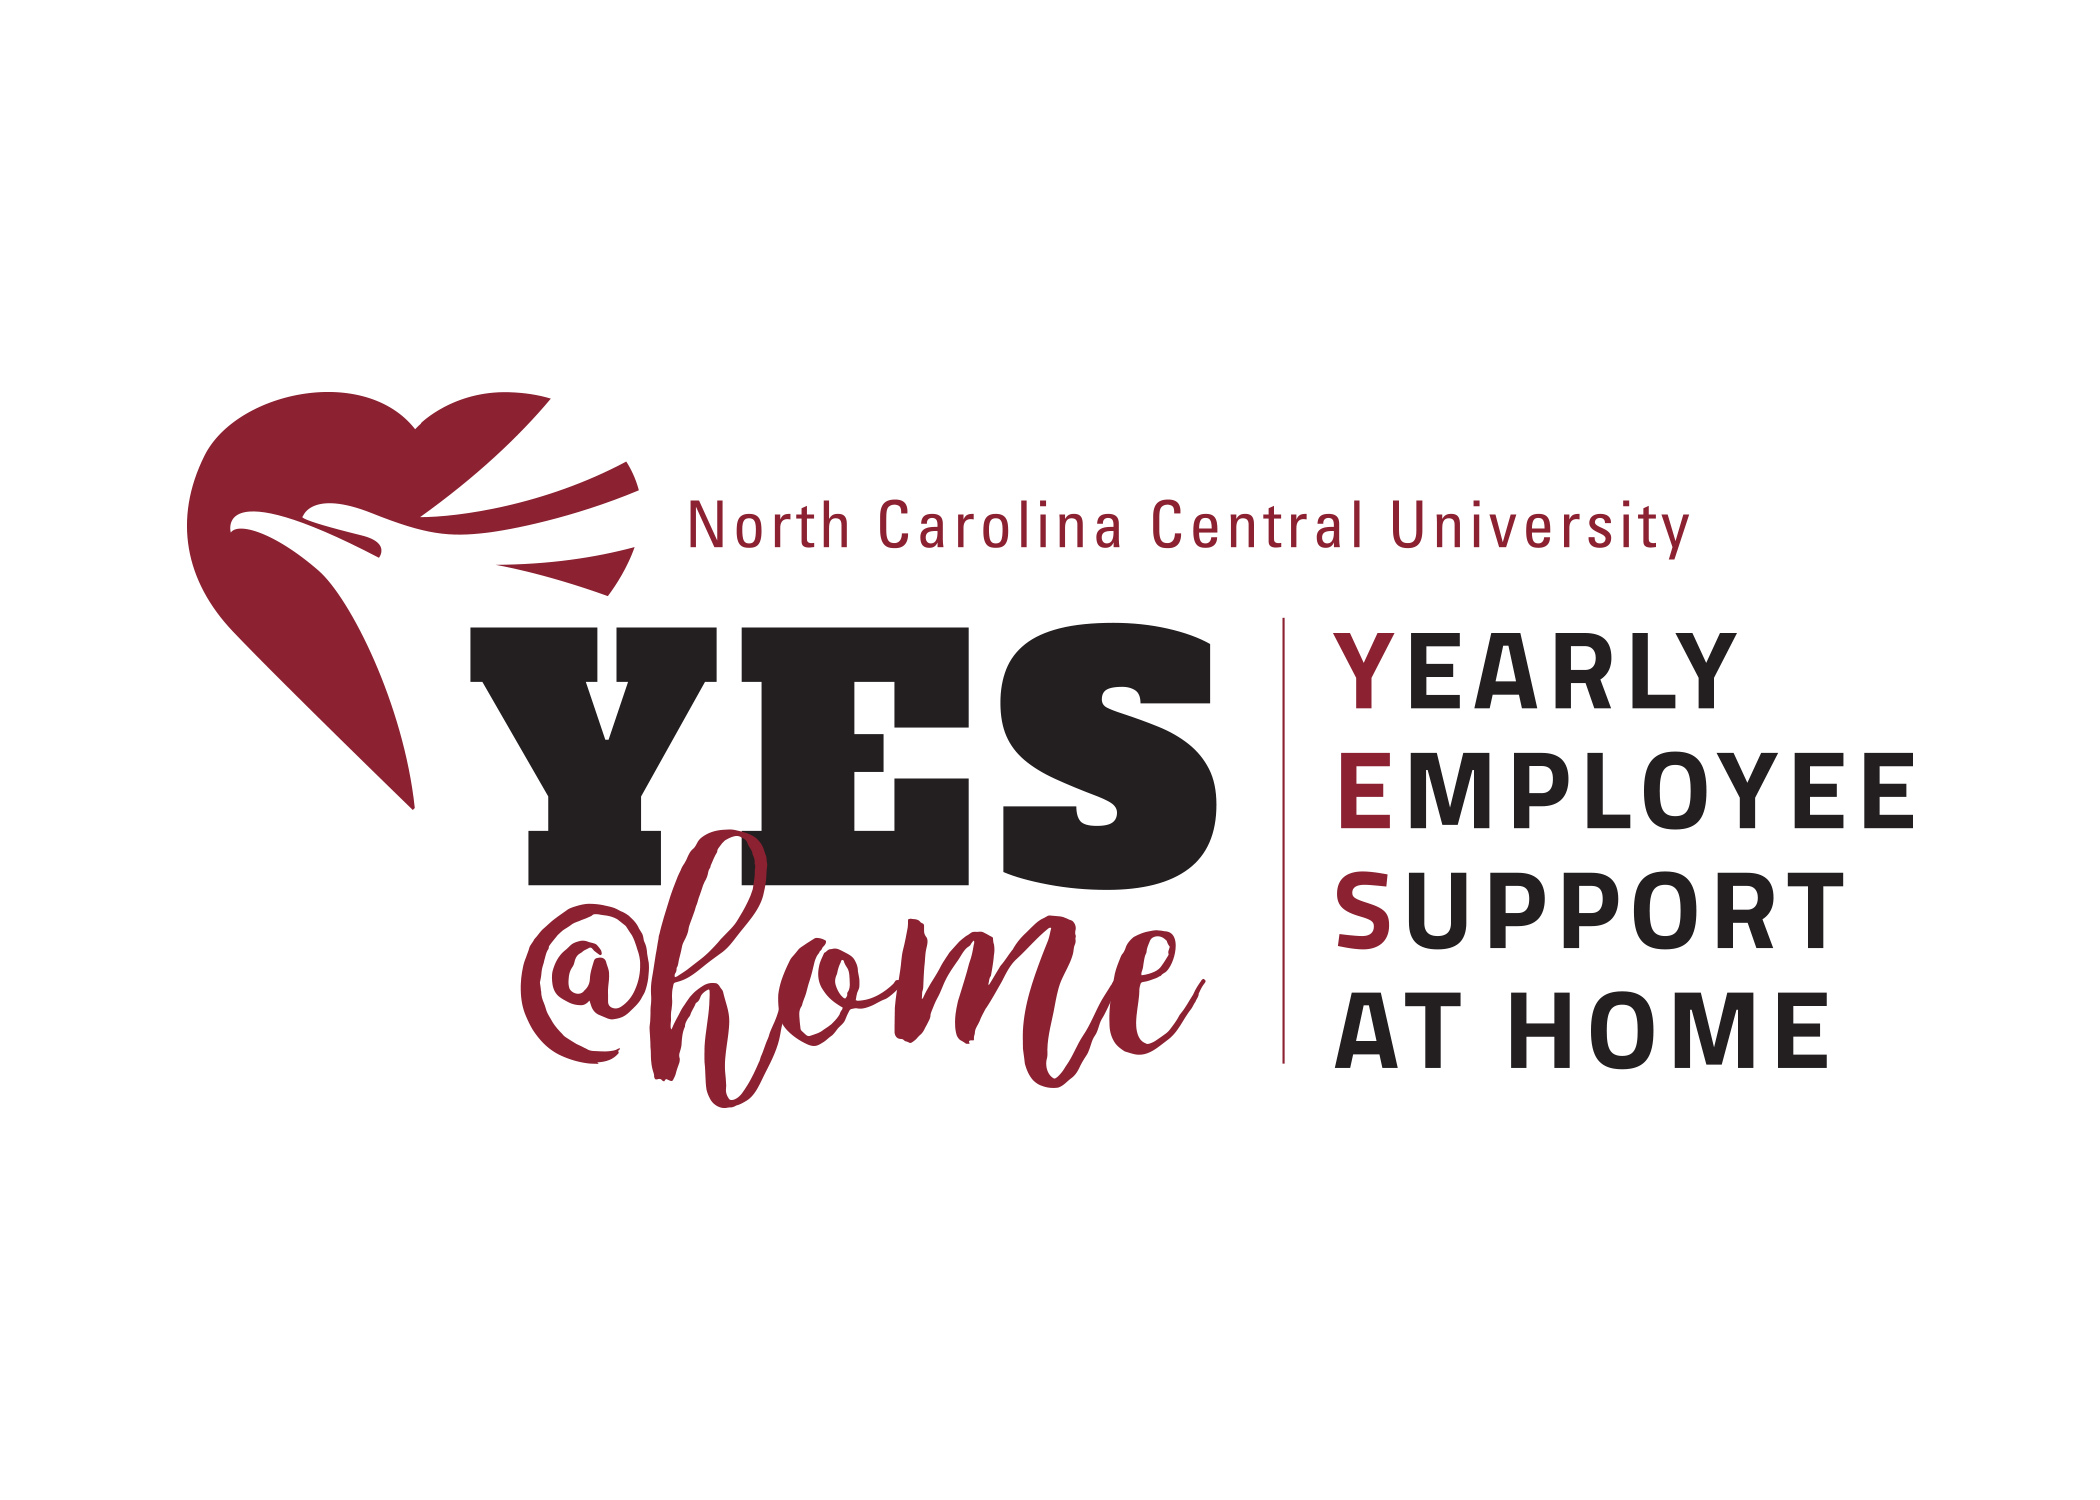 Yes Campaign Logo showing Yearly Employee Support at home